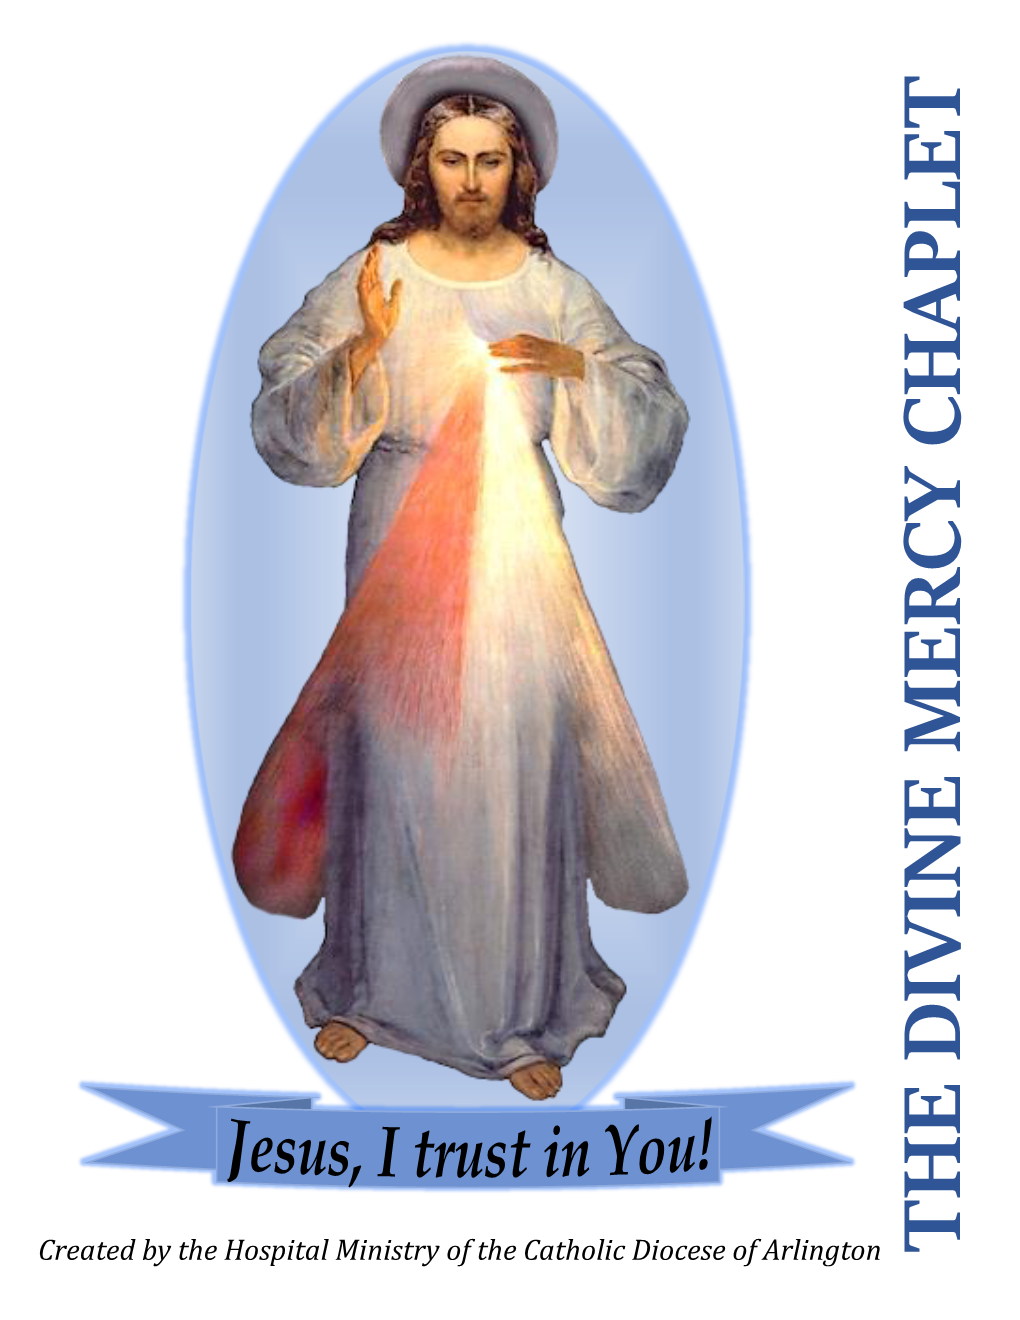 THE DIVINE MERCY CHAPLET Introduction to the Divine Mercy Chaplet the Divine Mercy Chaplet Is a Powerful Devotion Given by Our Lord to a Polish Nun, St